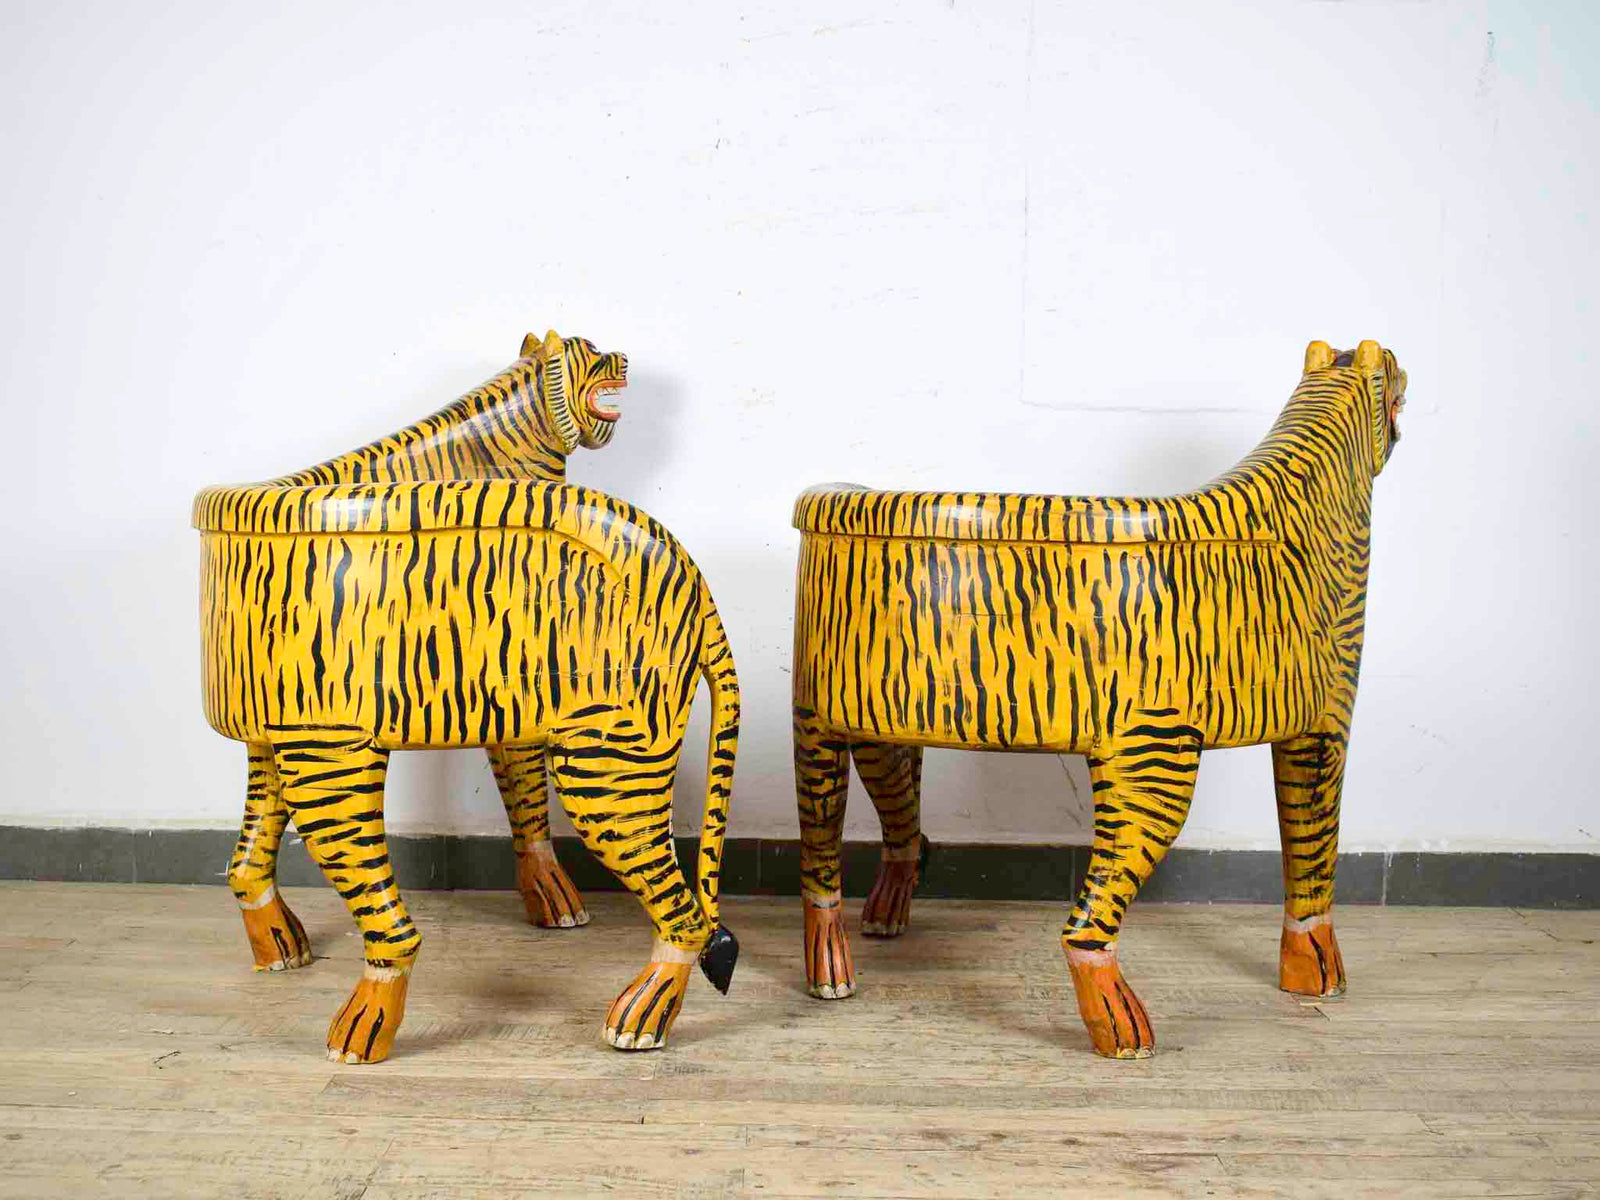 MIIL-2380 Pair of Wooden Tiger Chairs C31